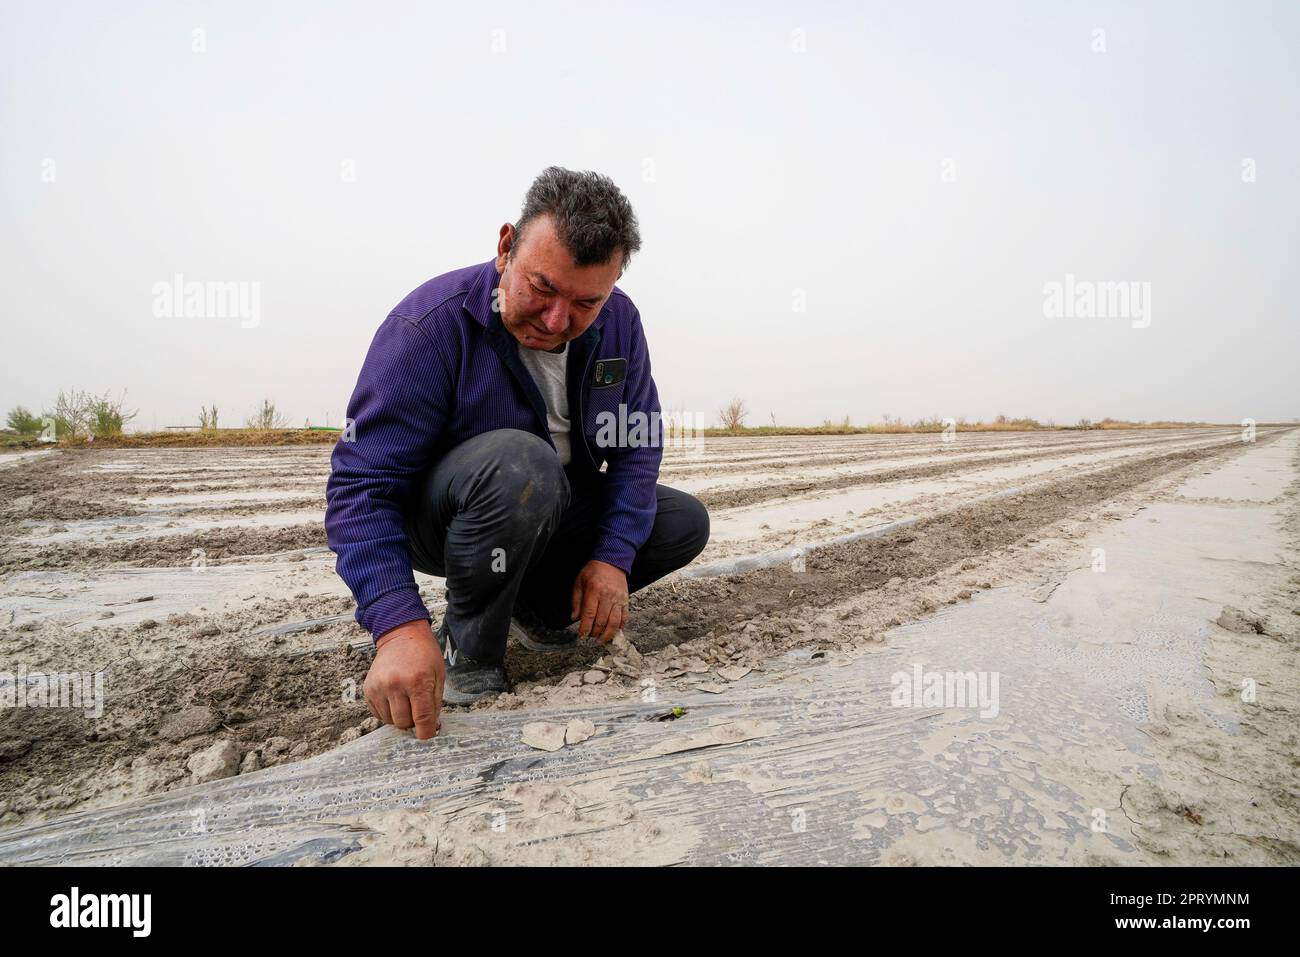 (230427) -- YULI, April 27, 2023 (Xinhua) -- Arkin Reyim inspects the growing condition of cotton shoots at a cotton field in the Bax Mali Village of Yuli County, northwest China's Xinjiang Uygur Autonomous Region, April 22, 2023.  Arkin Reyim is a 51-year-old cotton farmer with more than 300 mu (20 hectares) of cotton fields in the Bax Mali Village of Yuli County in Xinjiang.     Arkin's courage and unique vision has prompted him to start growing cotton in 2004 when he got married with his wife Hasiyat Kasim. Since then, Arkin has devoted himself into the cultivation of cotton for over 10 yea Stock Photo